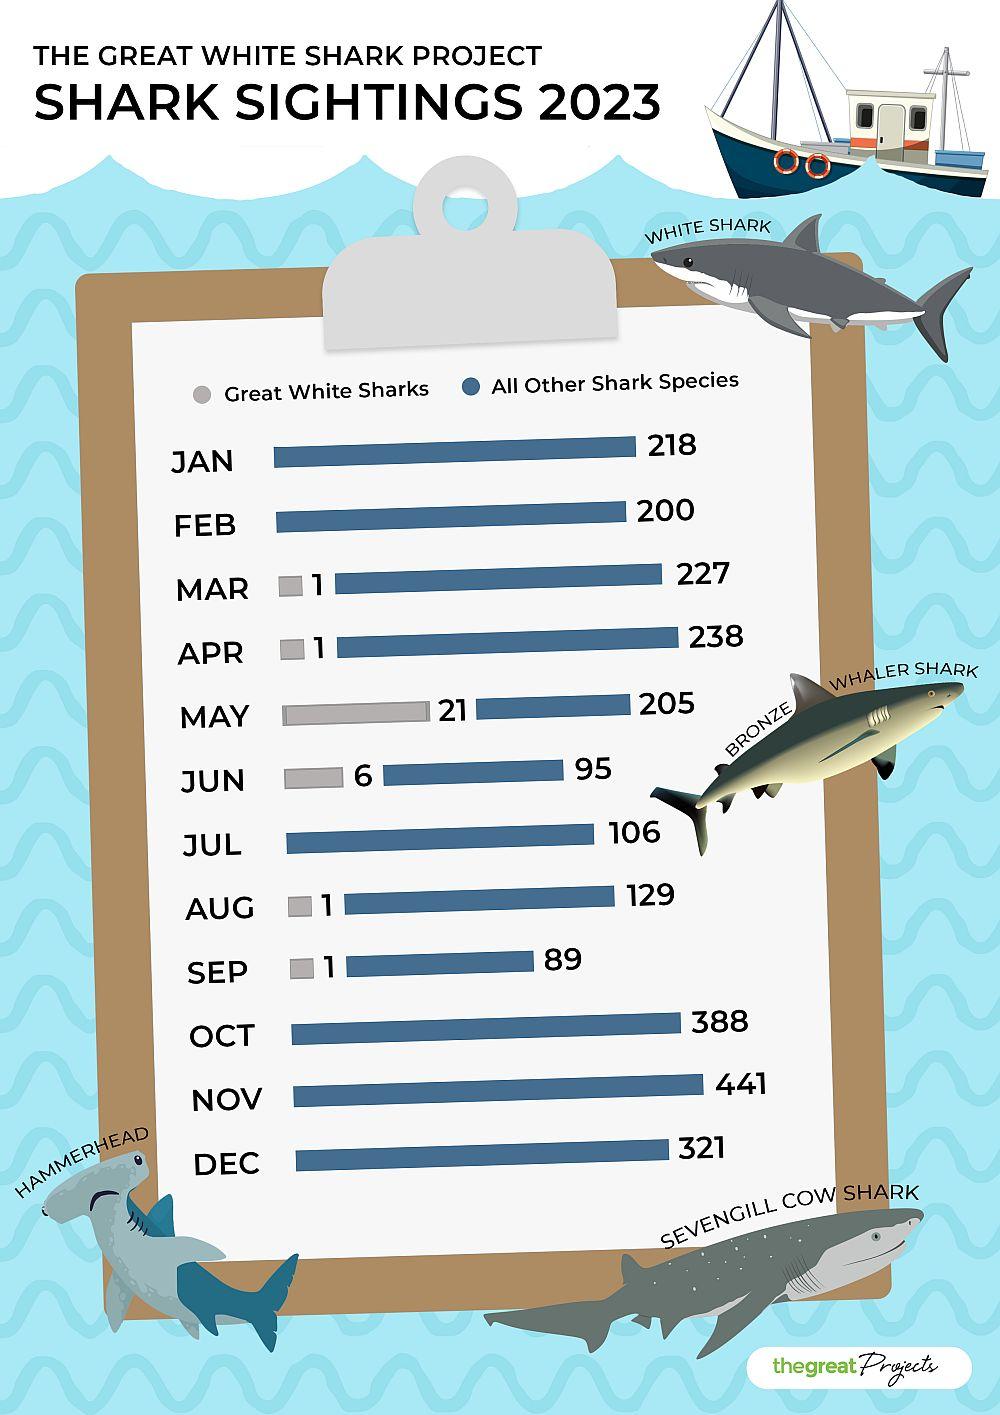 Infographic of shark sightings on The Great White Shark Project in 2023